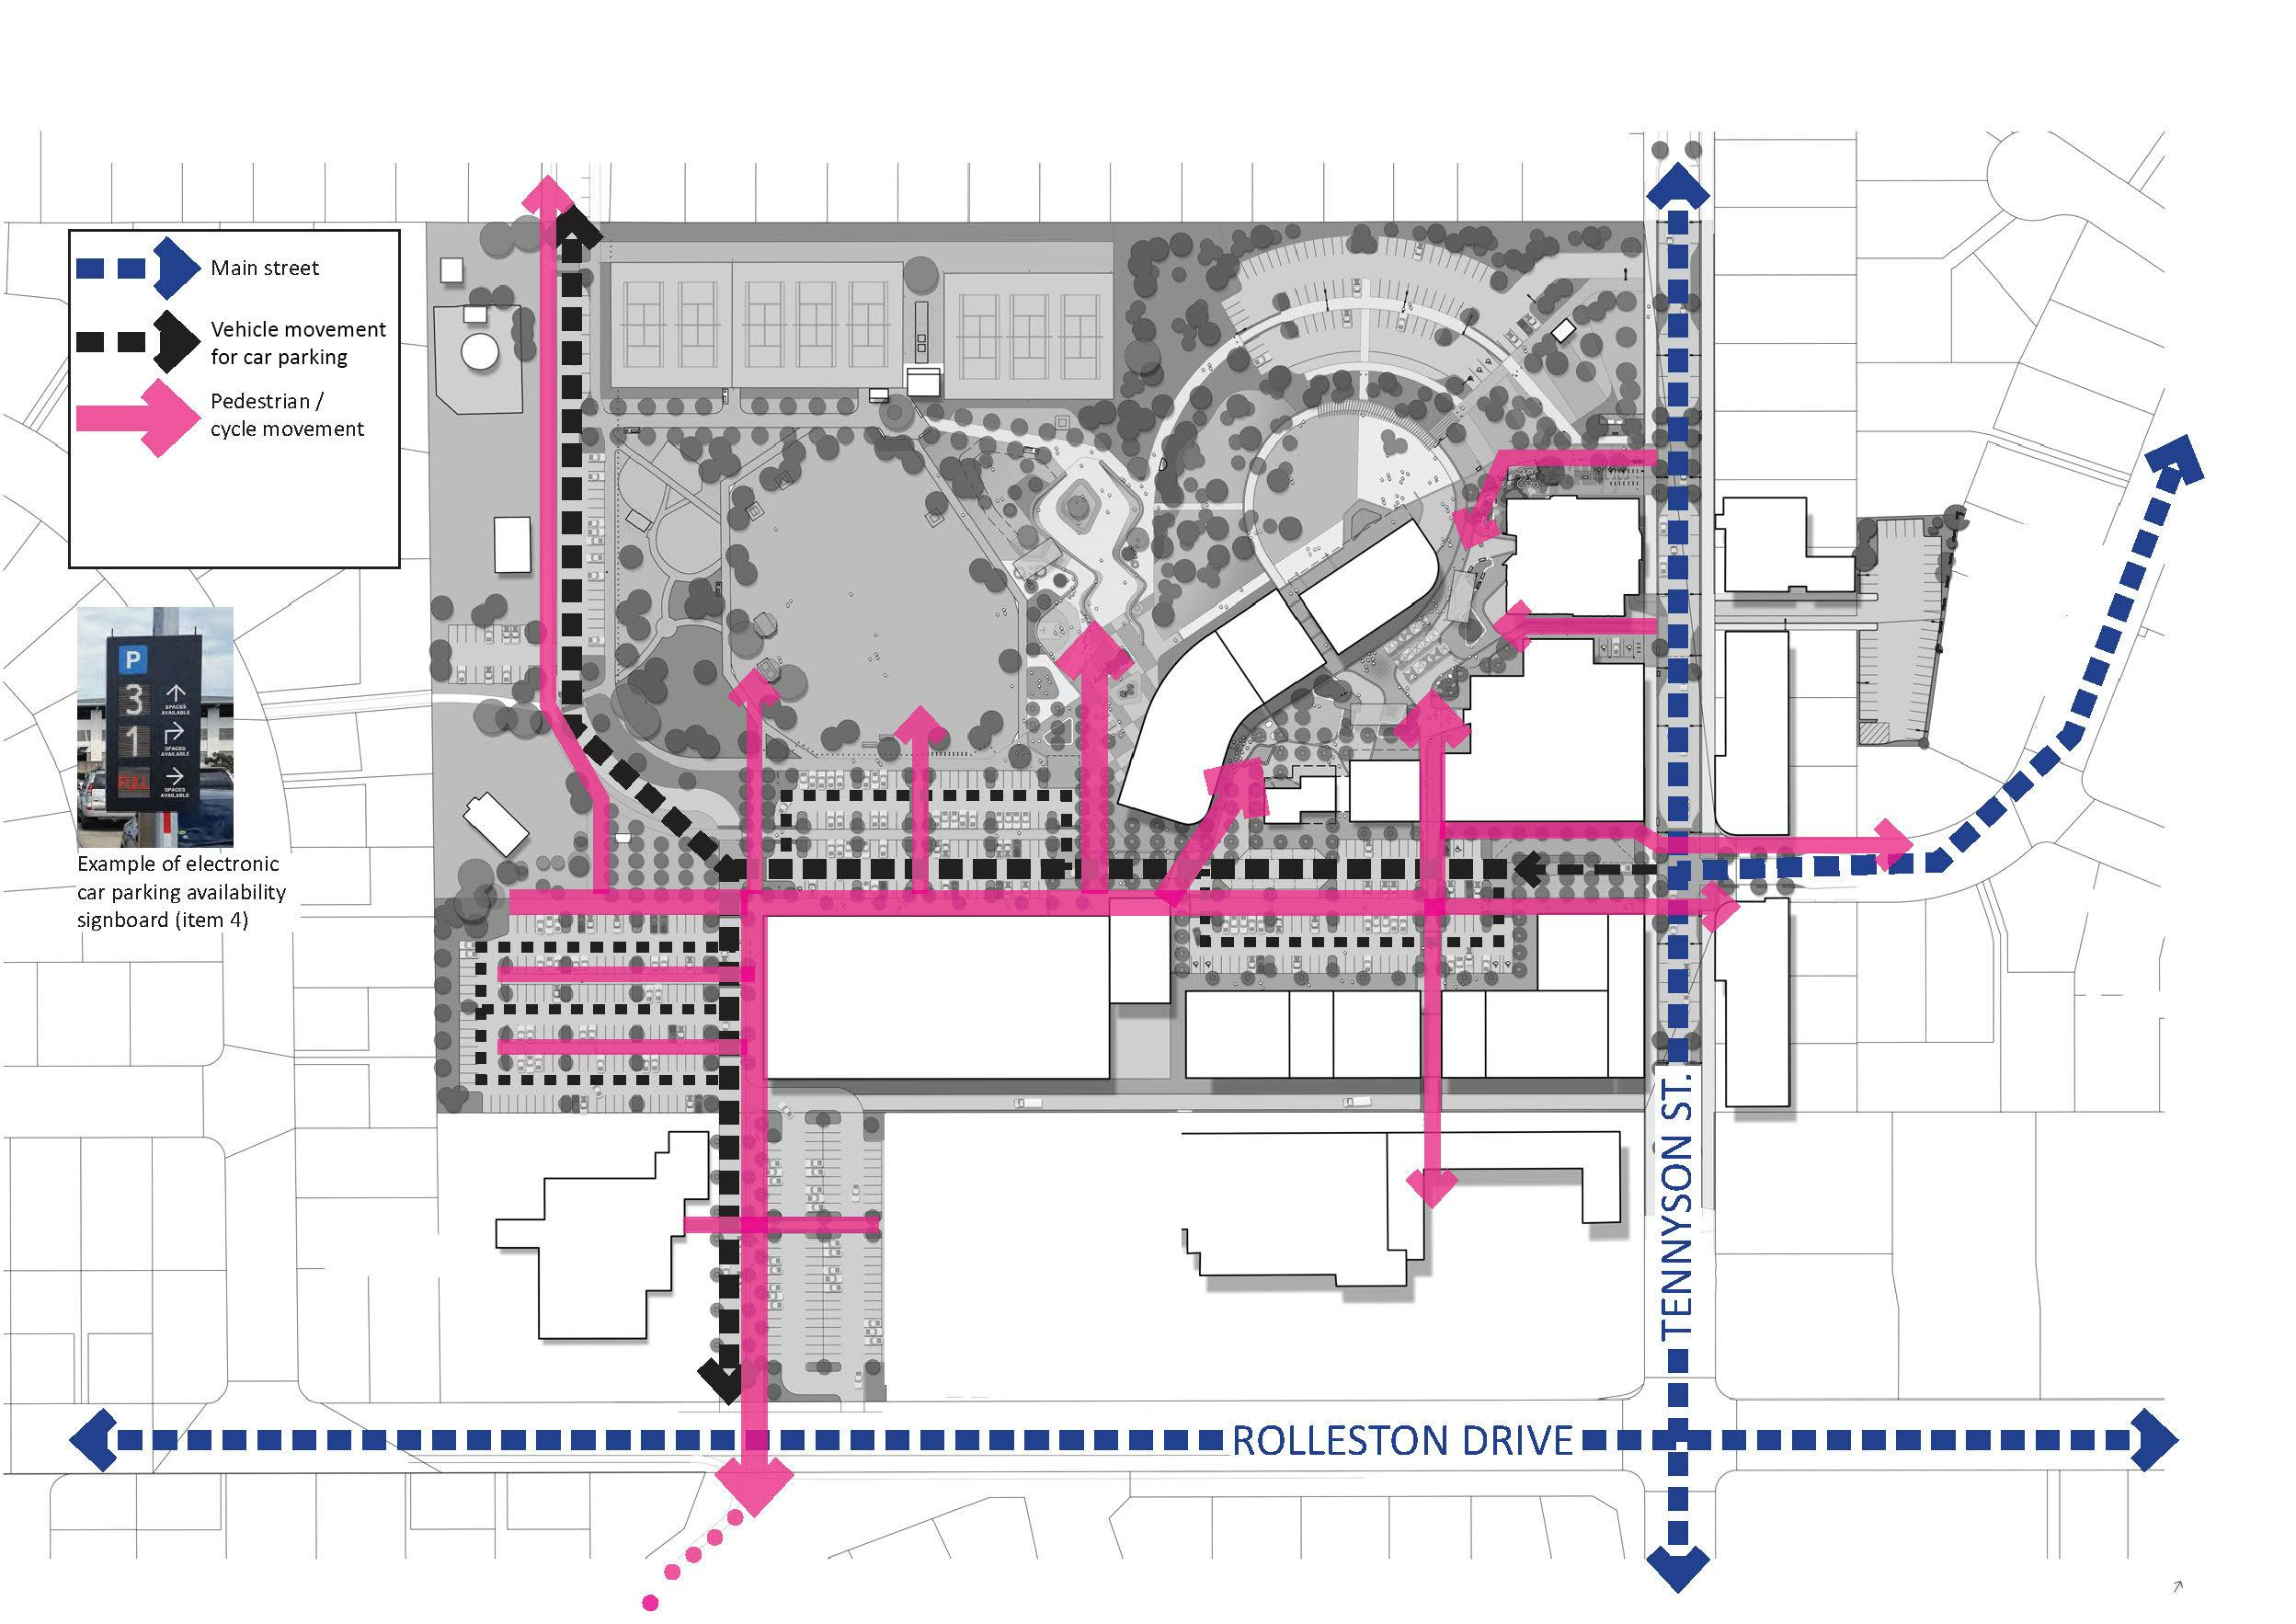 Outline of proposed pedestrian and vehicle movement within the town centre.